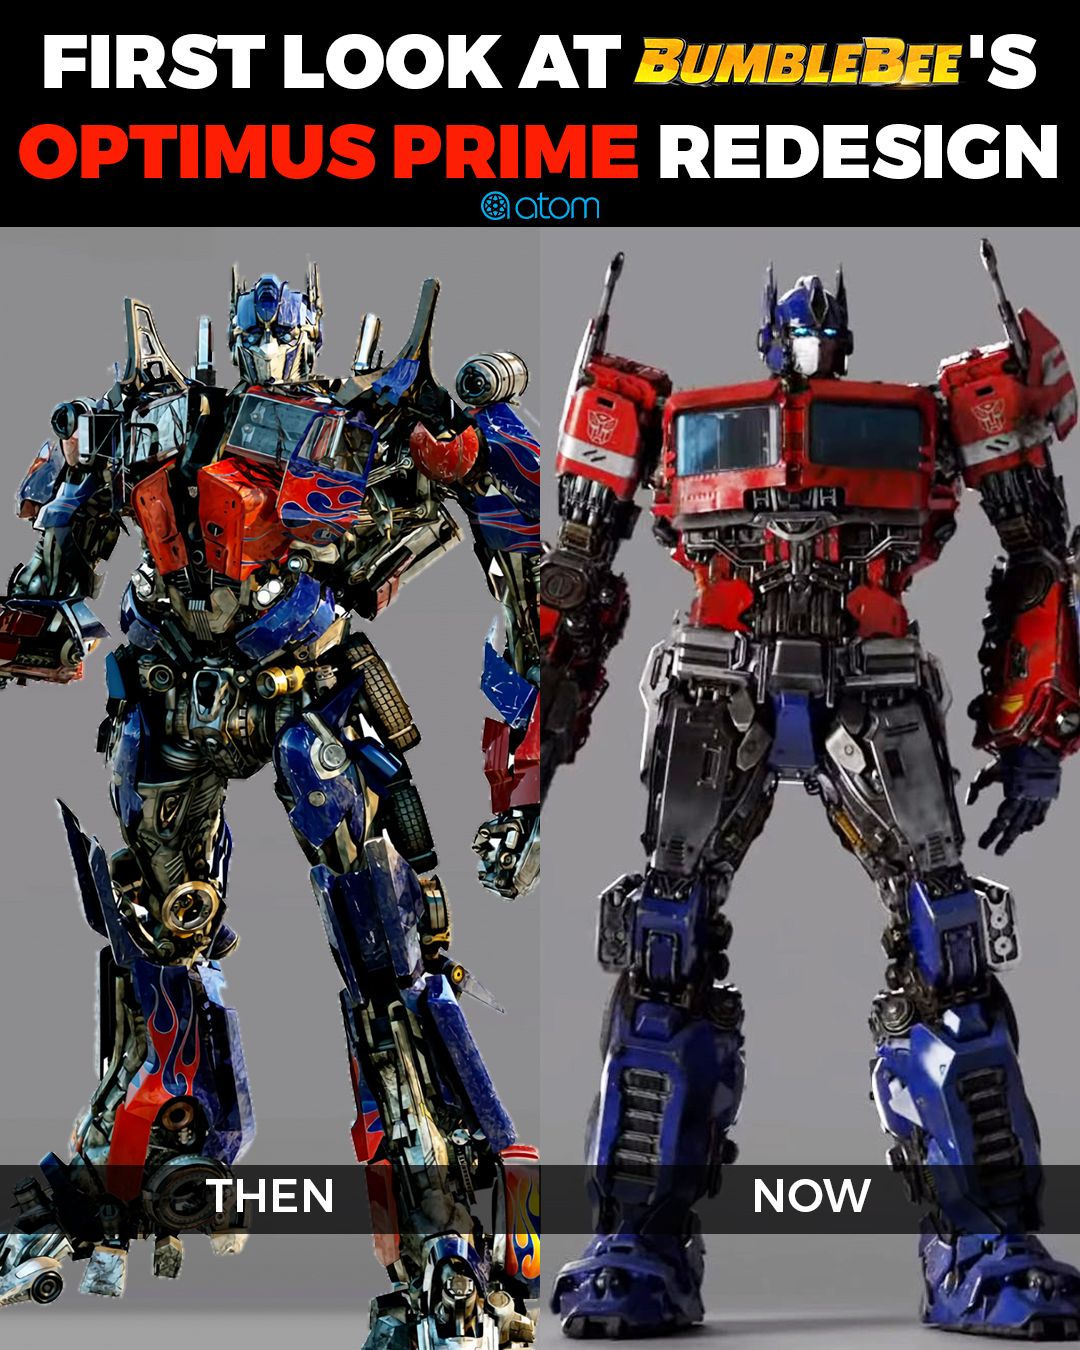 Rød dato horisont Efternavn Atom Tickets on Twitter: "Here's a first look at Optimus Prime's new  Generation One-inspired design for #BumblebeeMovie. Transformers are  heading back to their roots! What are your first impressions?  https://t.co/hUj6oibIl4" / Twitter